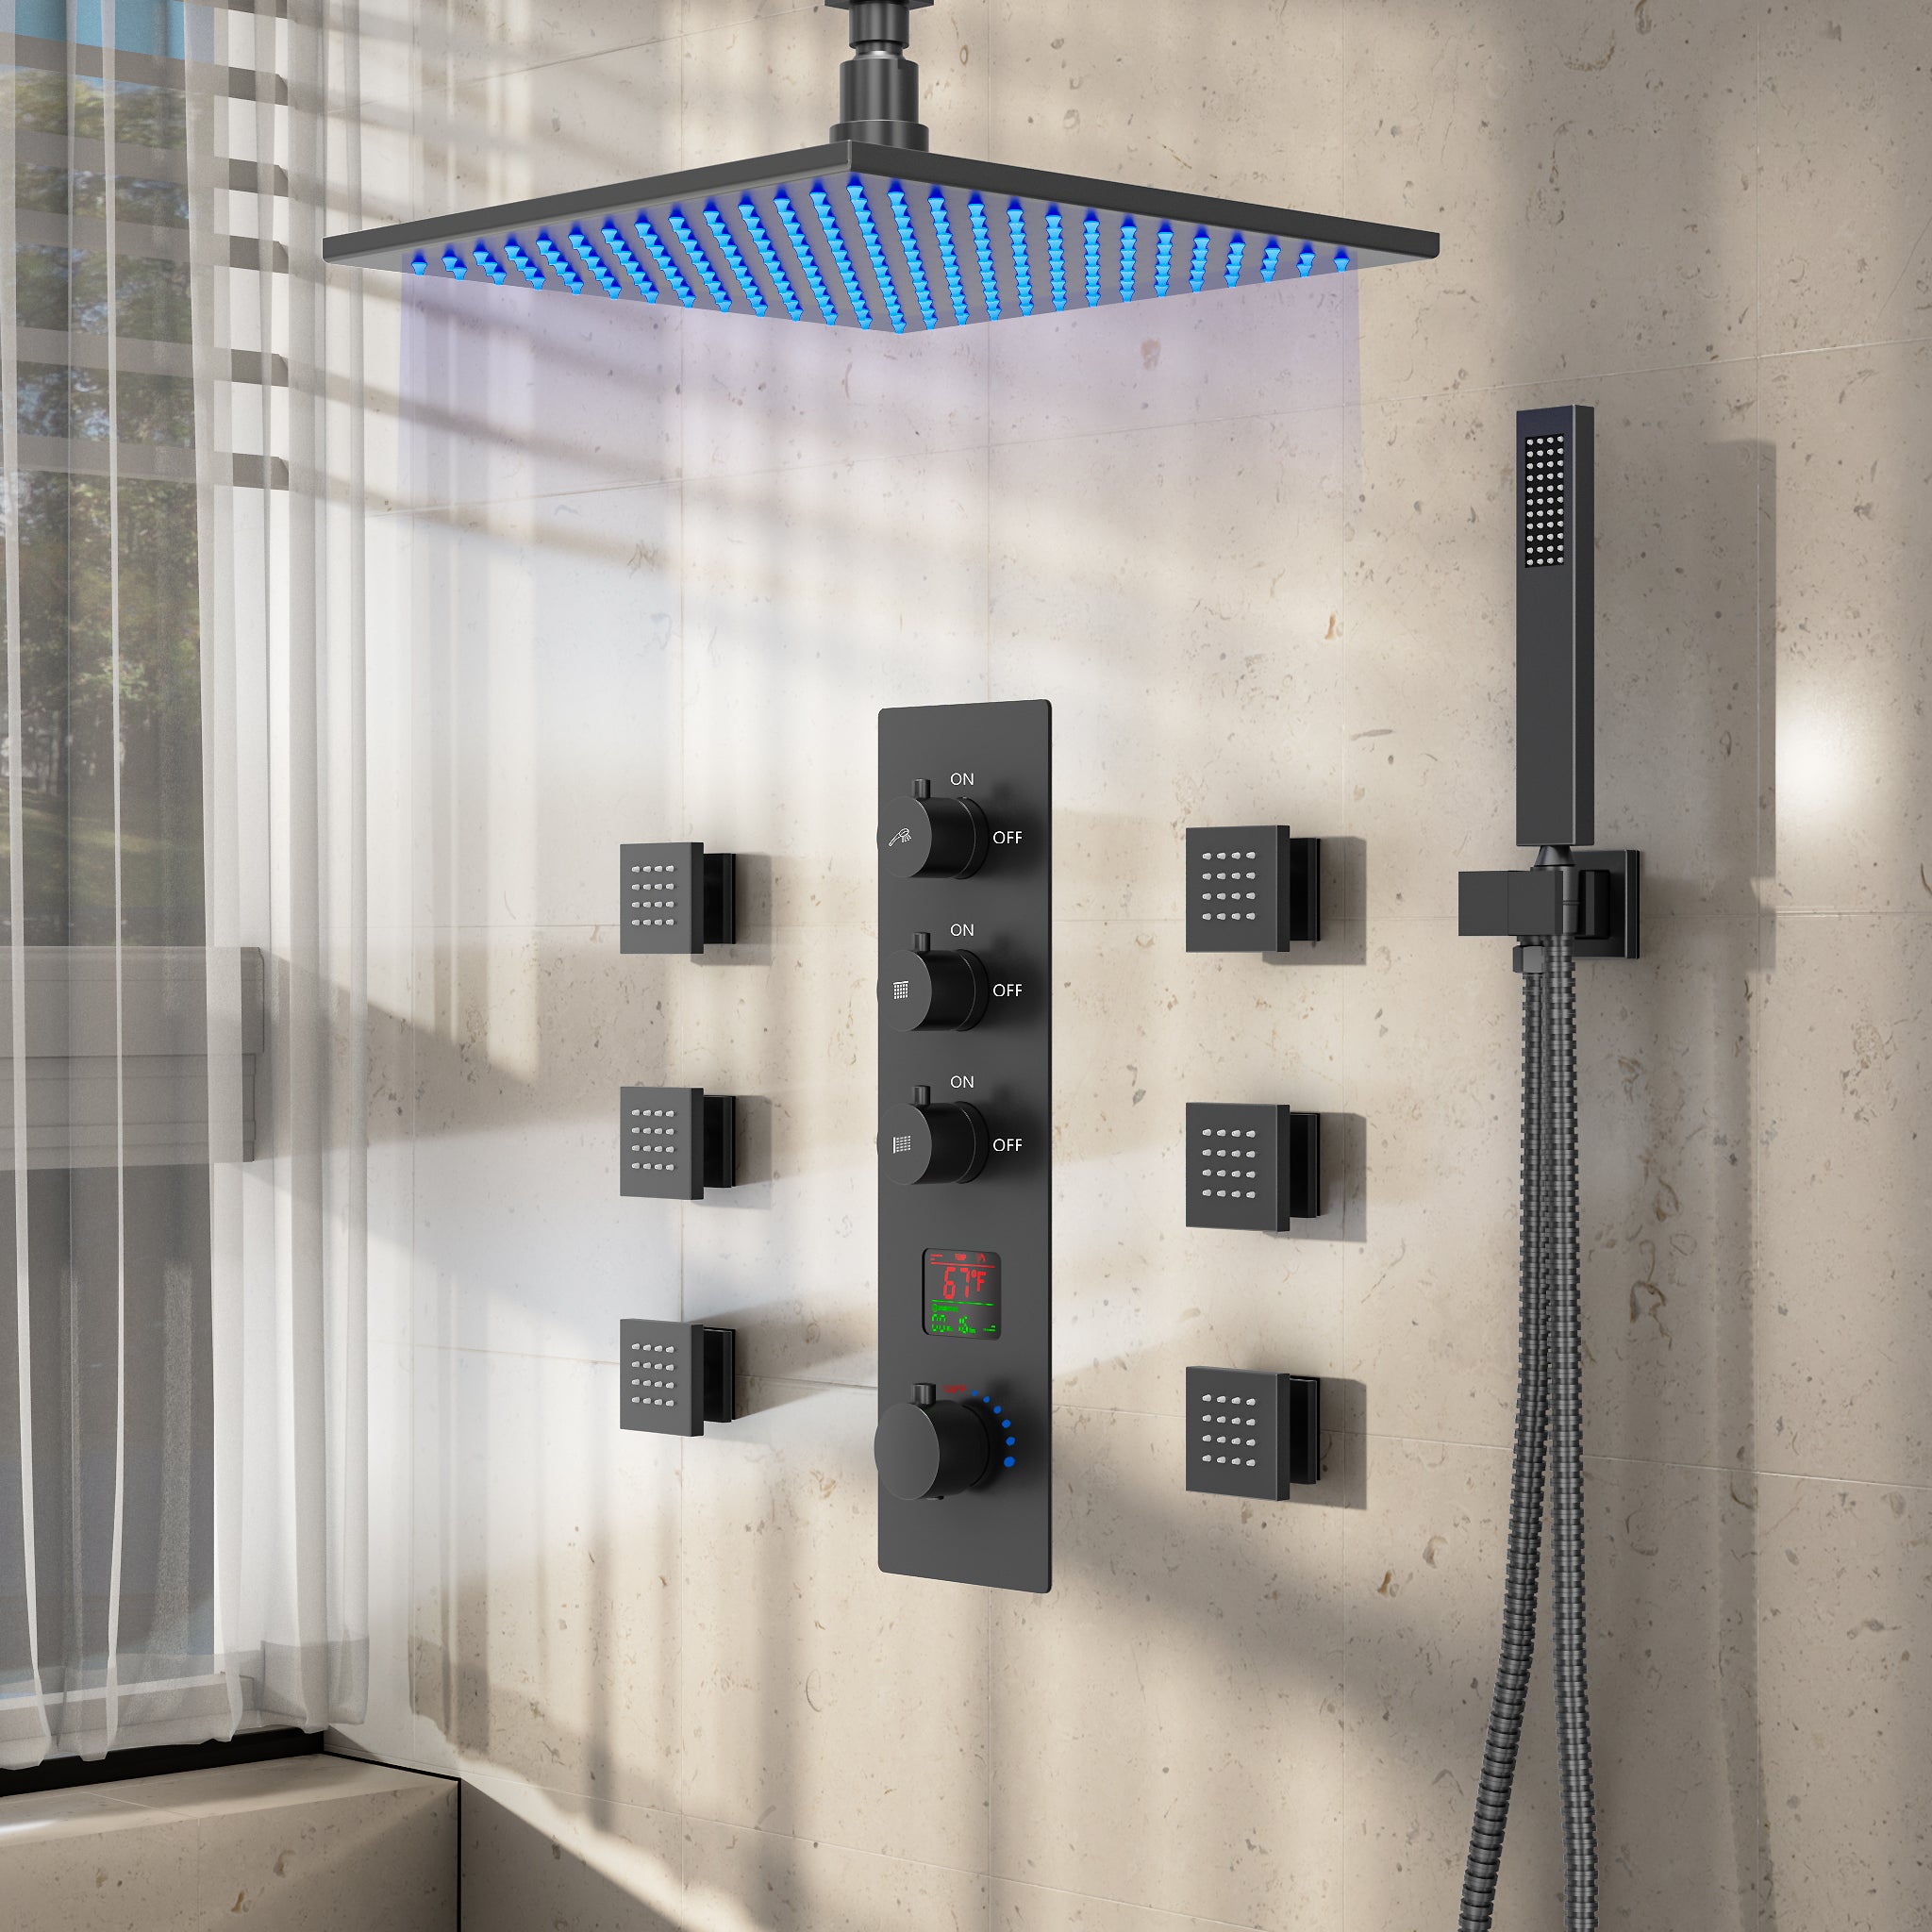 SFS-1026-BK12 EVERSTEIN LED Thermostatic Dual Function Shower Head System Ceiling Mounted with Rough-in Valve in Matte Black